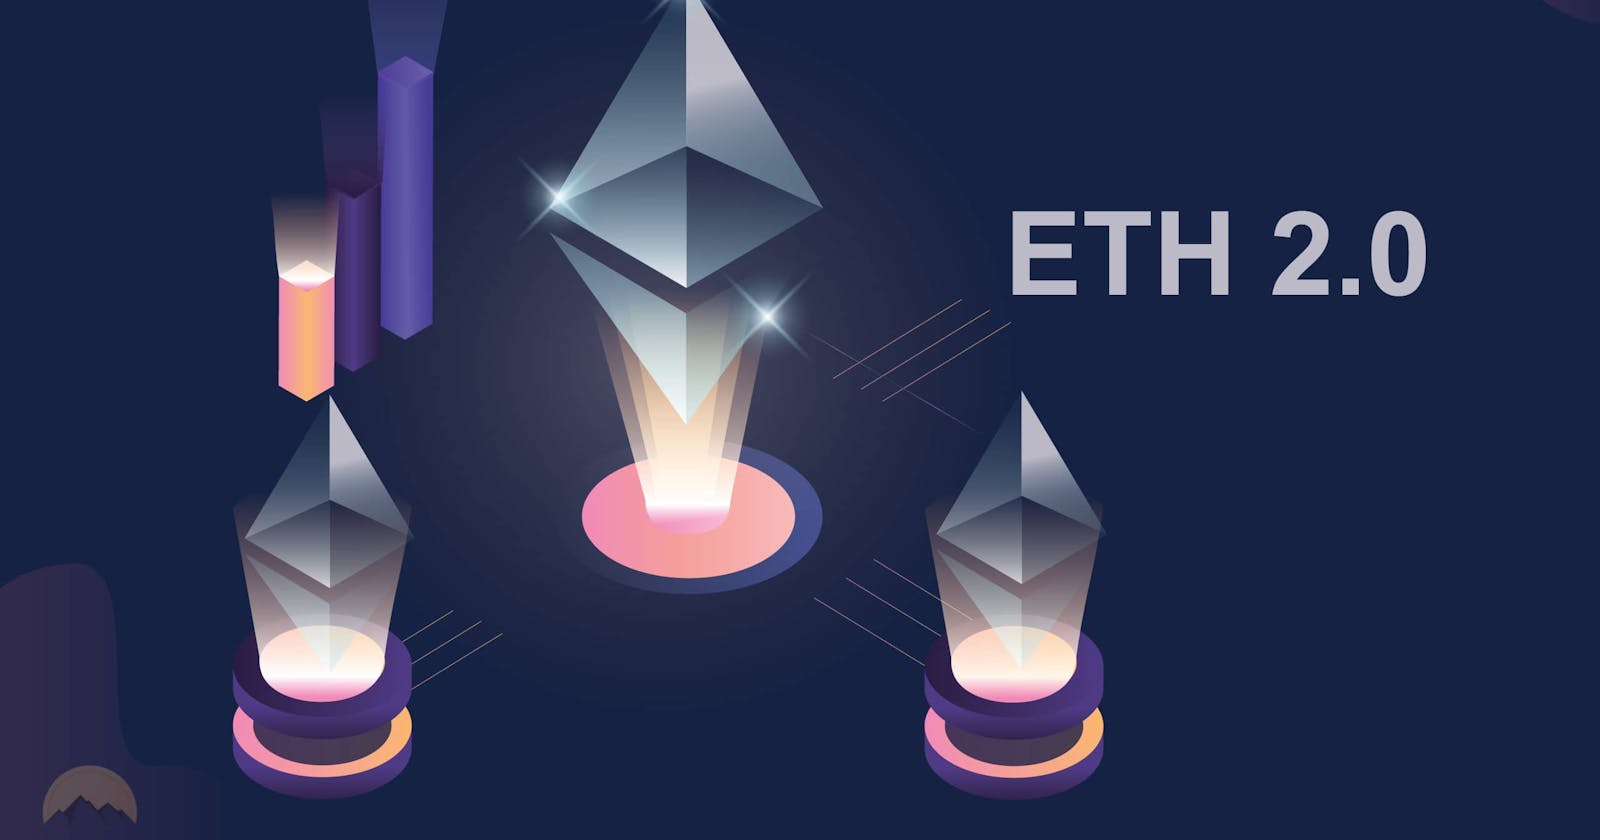 Ethereum 2.0: The transformation that could overtake Bitcoin